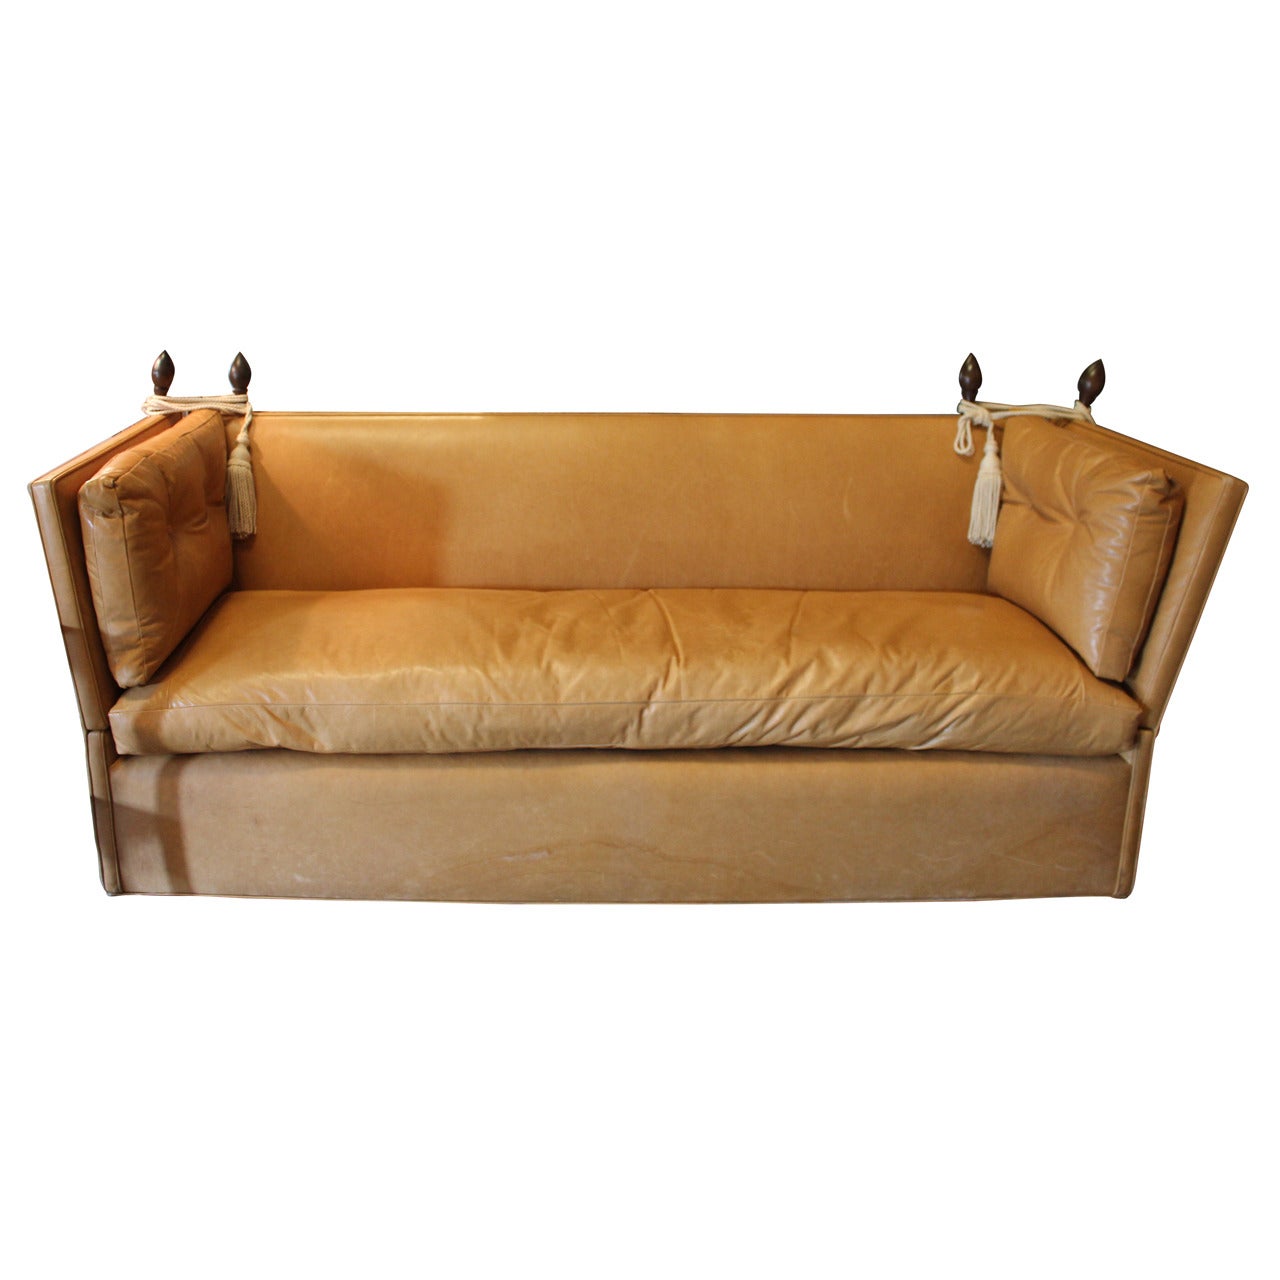 Knole Style Cognac Leather High Back Sofa For Sale